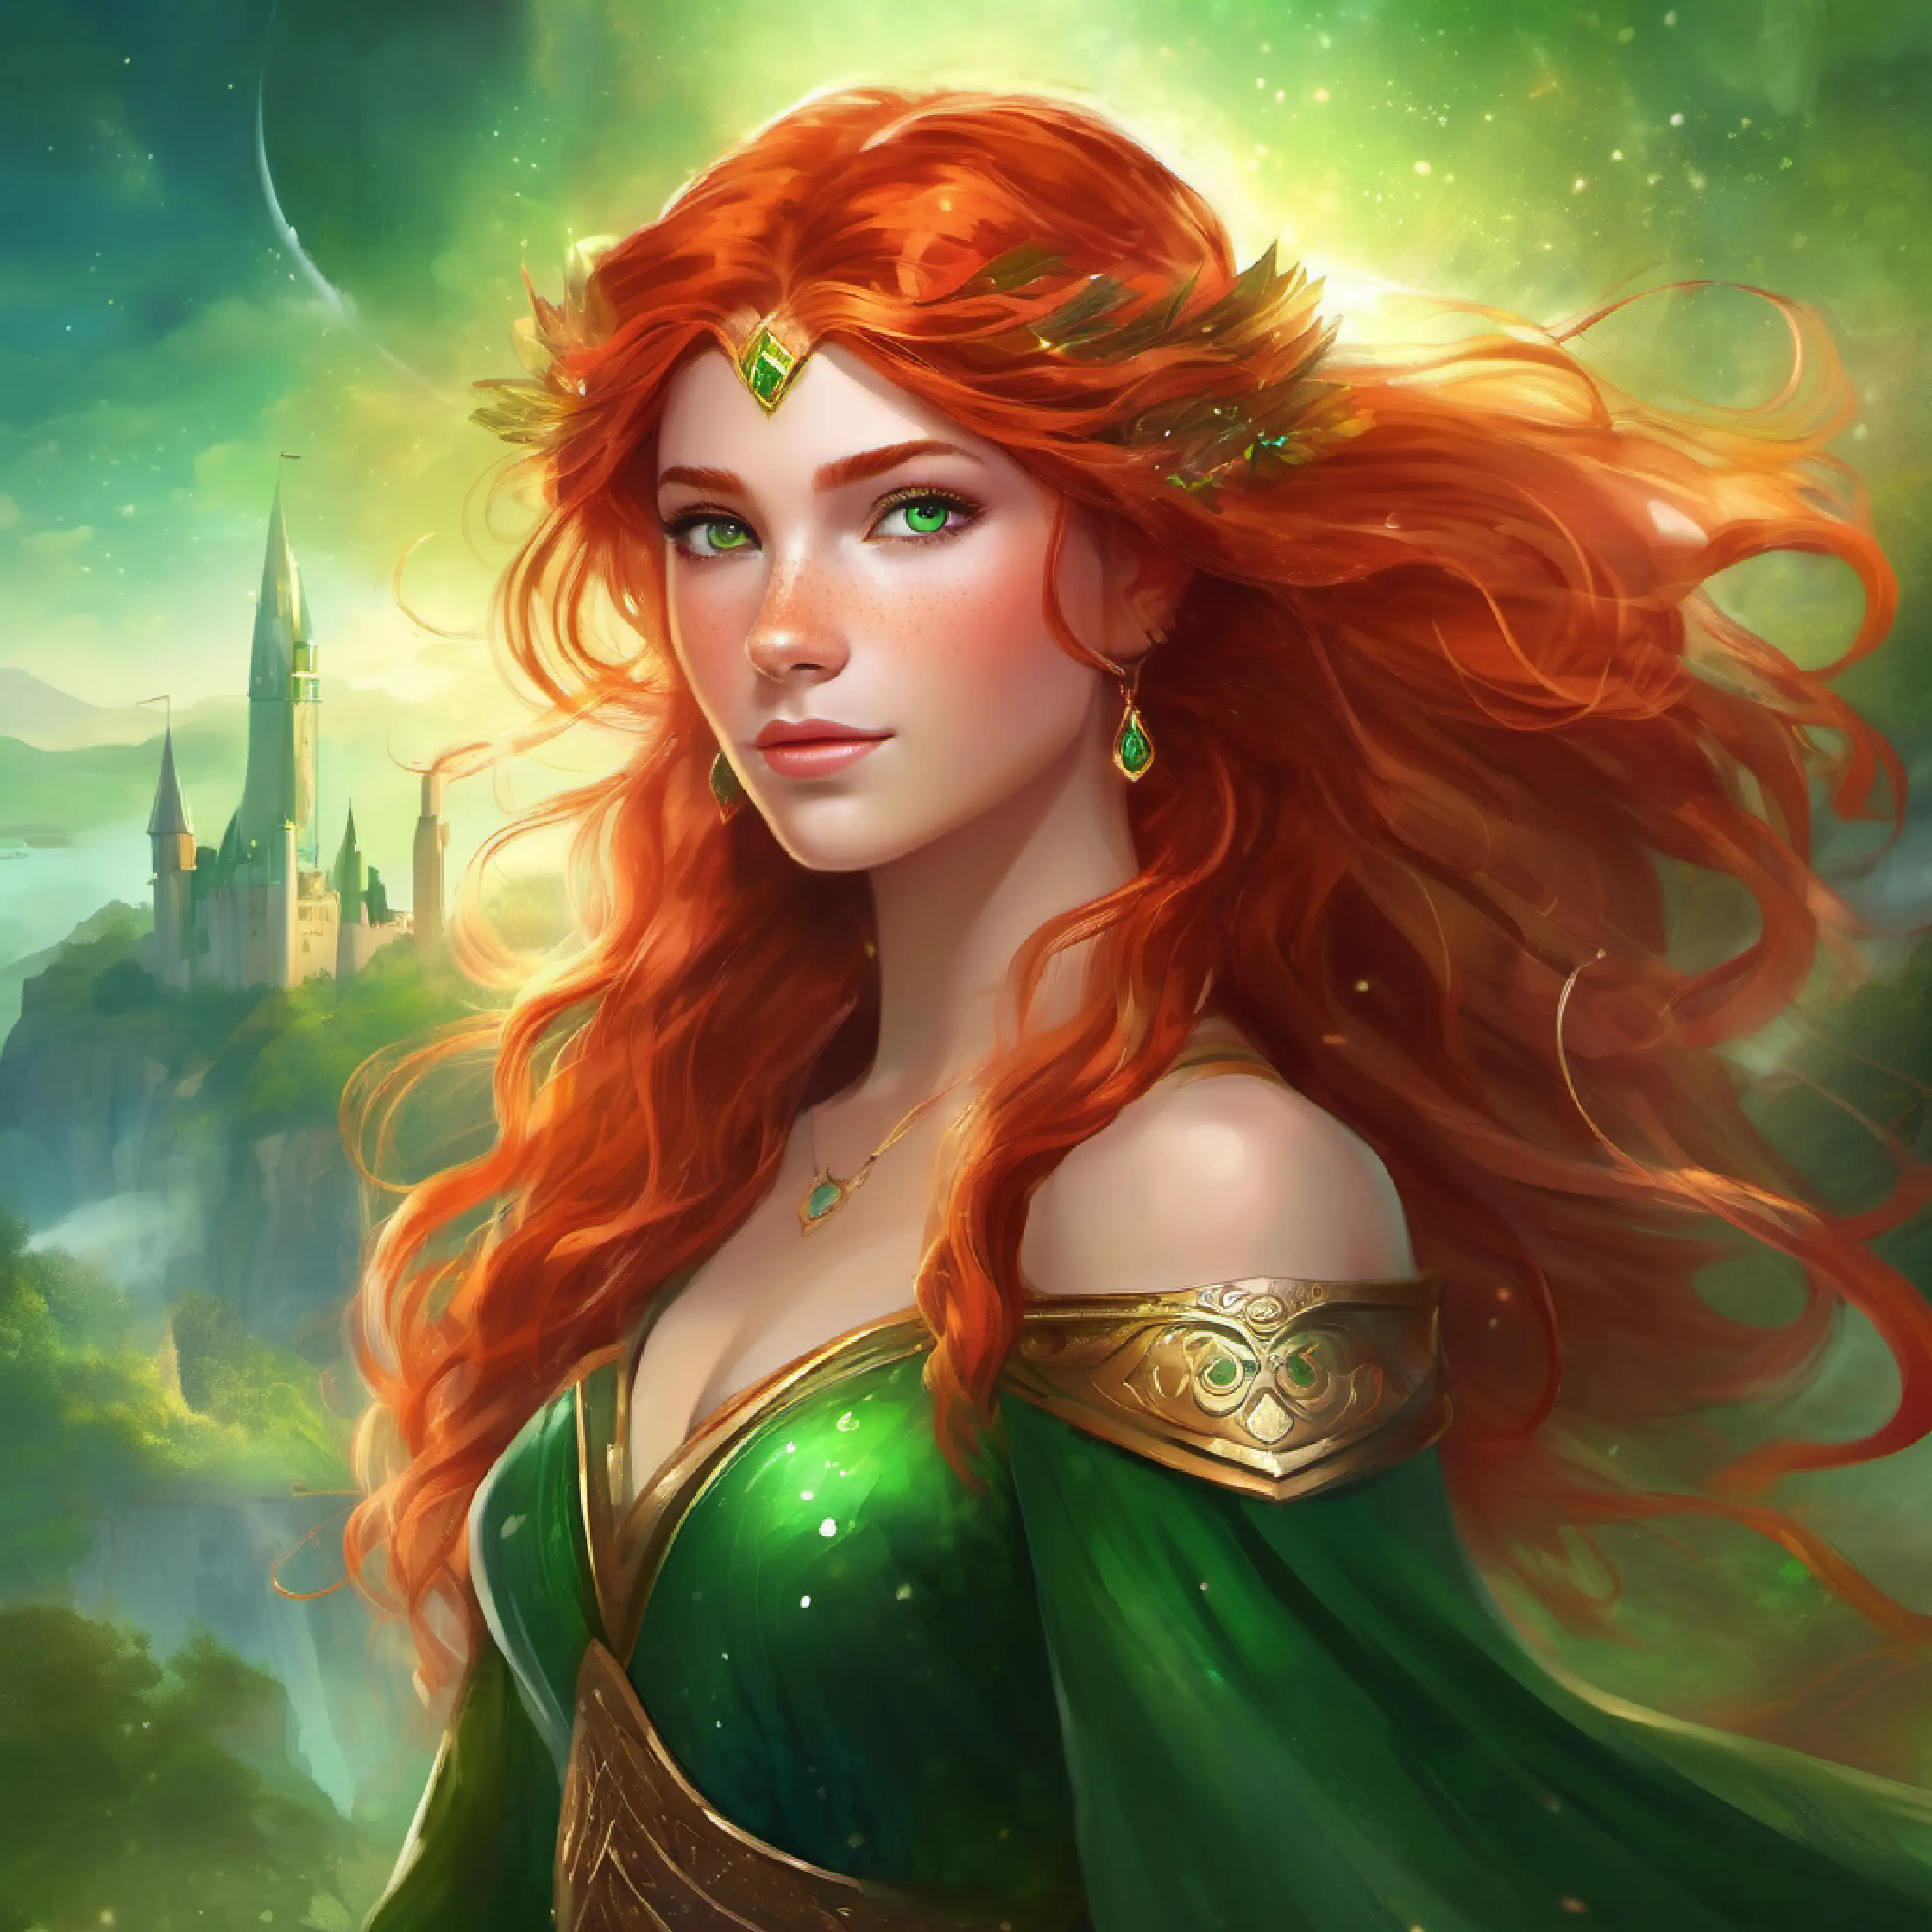 Introduction to Princess Brave girl with freckles, green eyes, and wild red hair and the vibrant kingdom